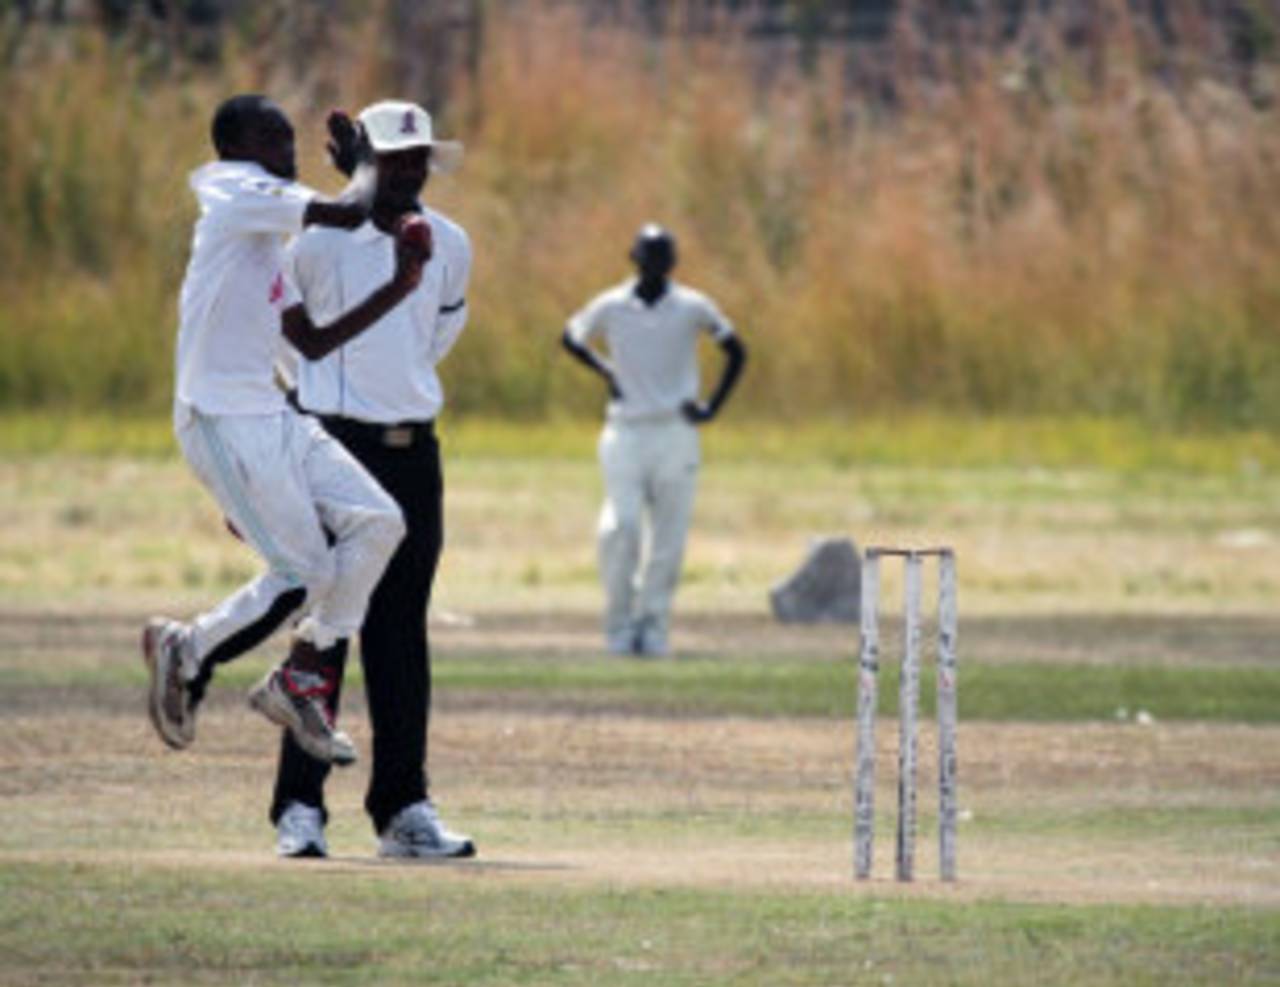 A bowler bowls in a club game in Zimbabwe